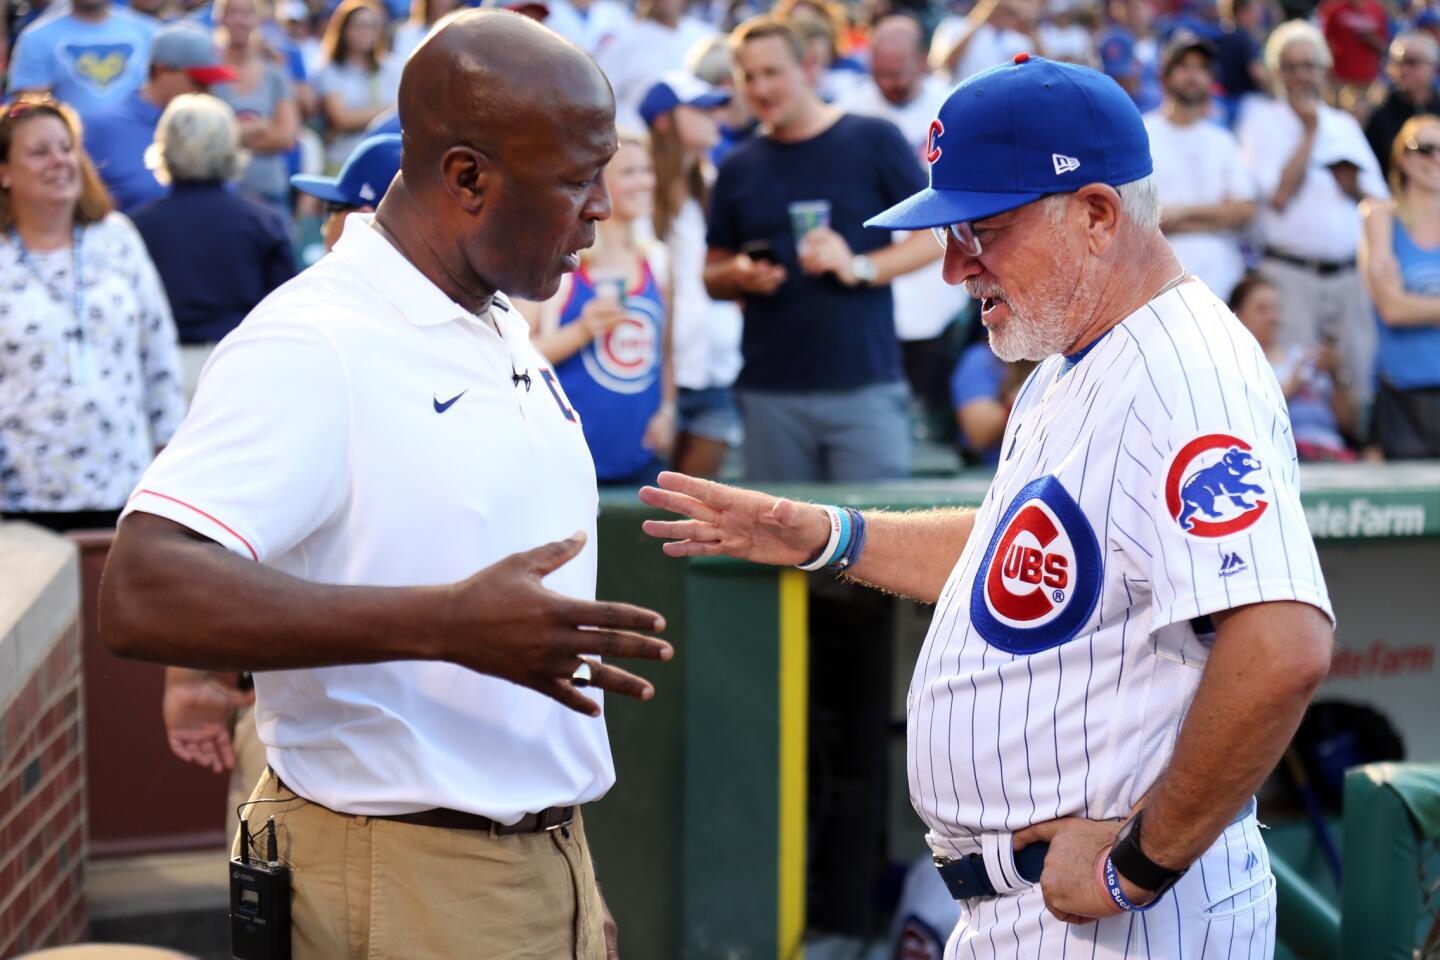 Illini football coach Lovie Smith shakes hands with Cubs manager Joe Maddon before a game at Wrigley on July 23, 2017.